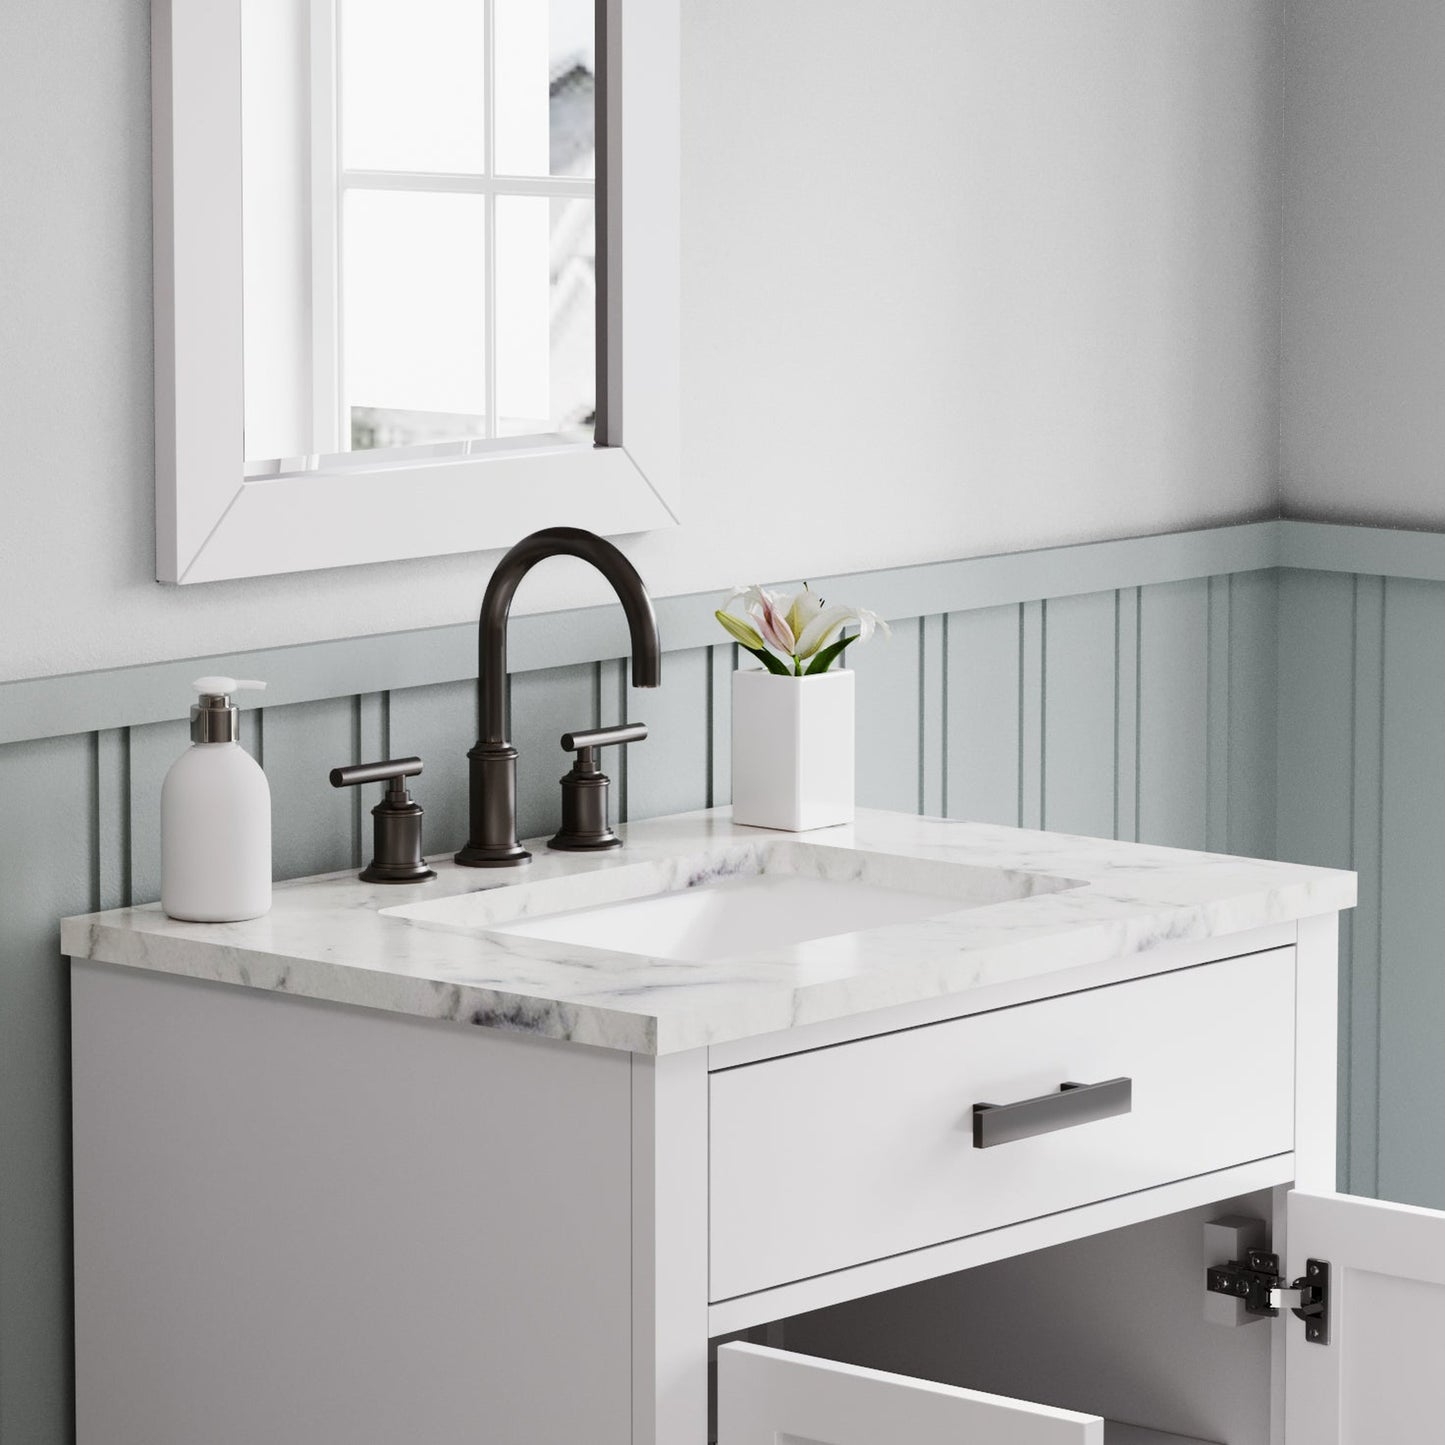 Water Creation Hartford 30" Single Sink Carrara White Marble Countertop Bath Vanity in Pure White with Gooseneck Faucet and Rectangular Mirror